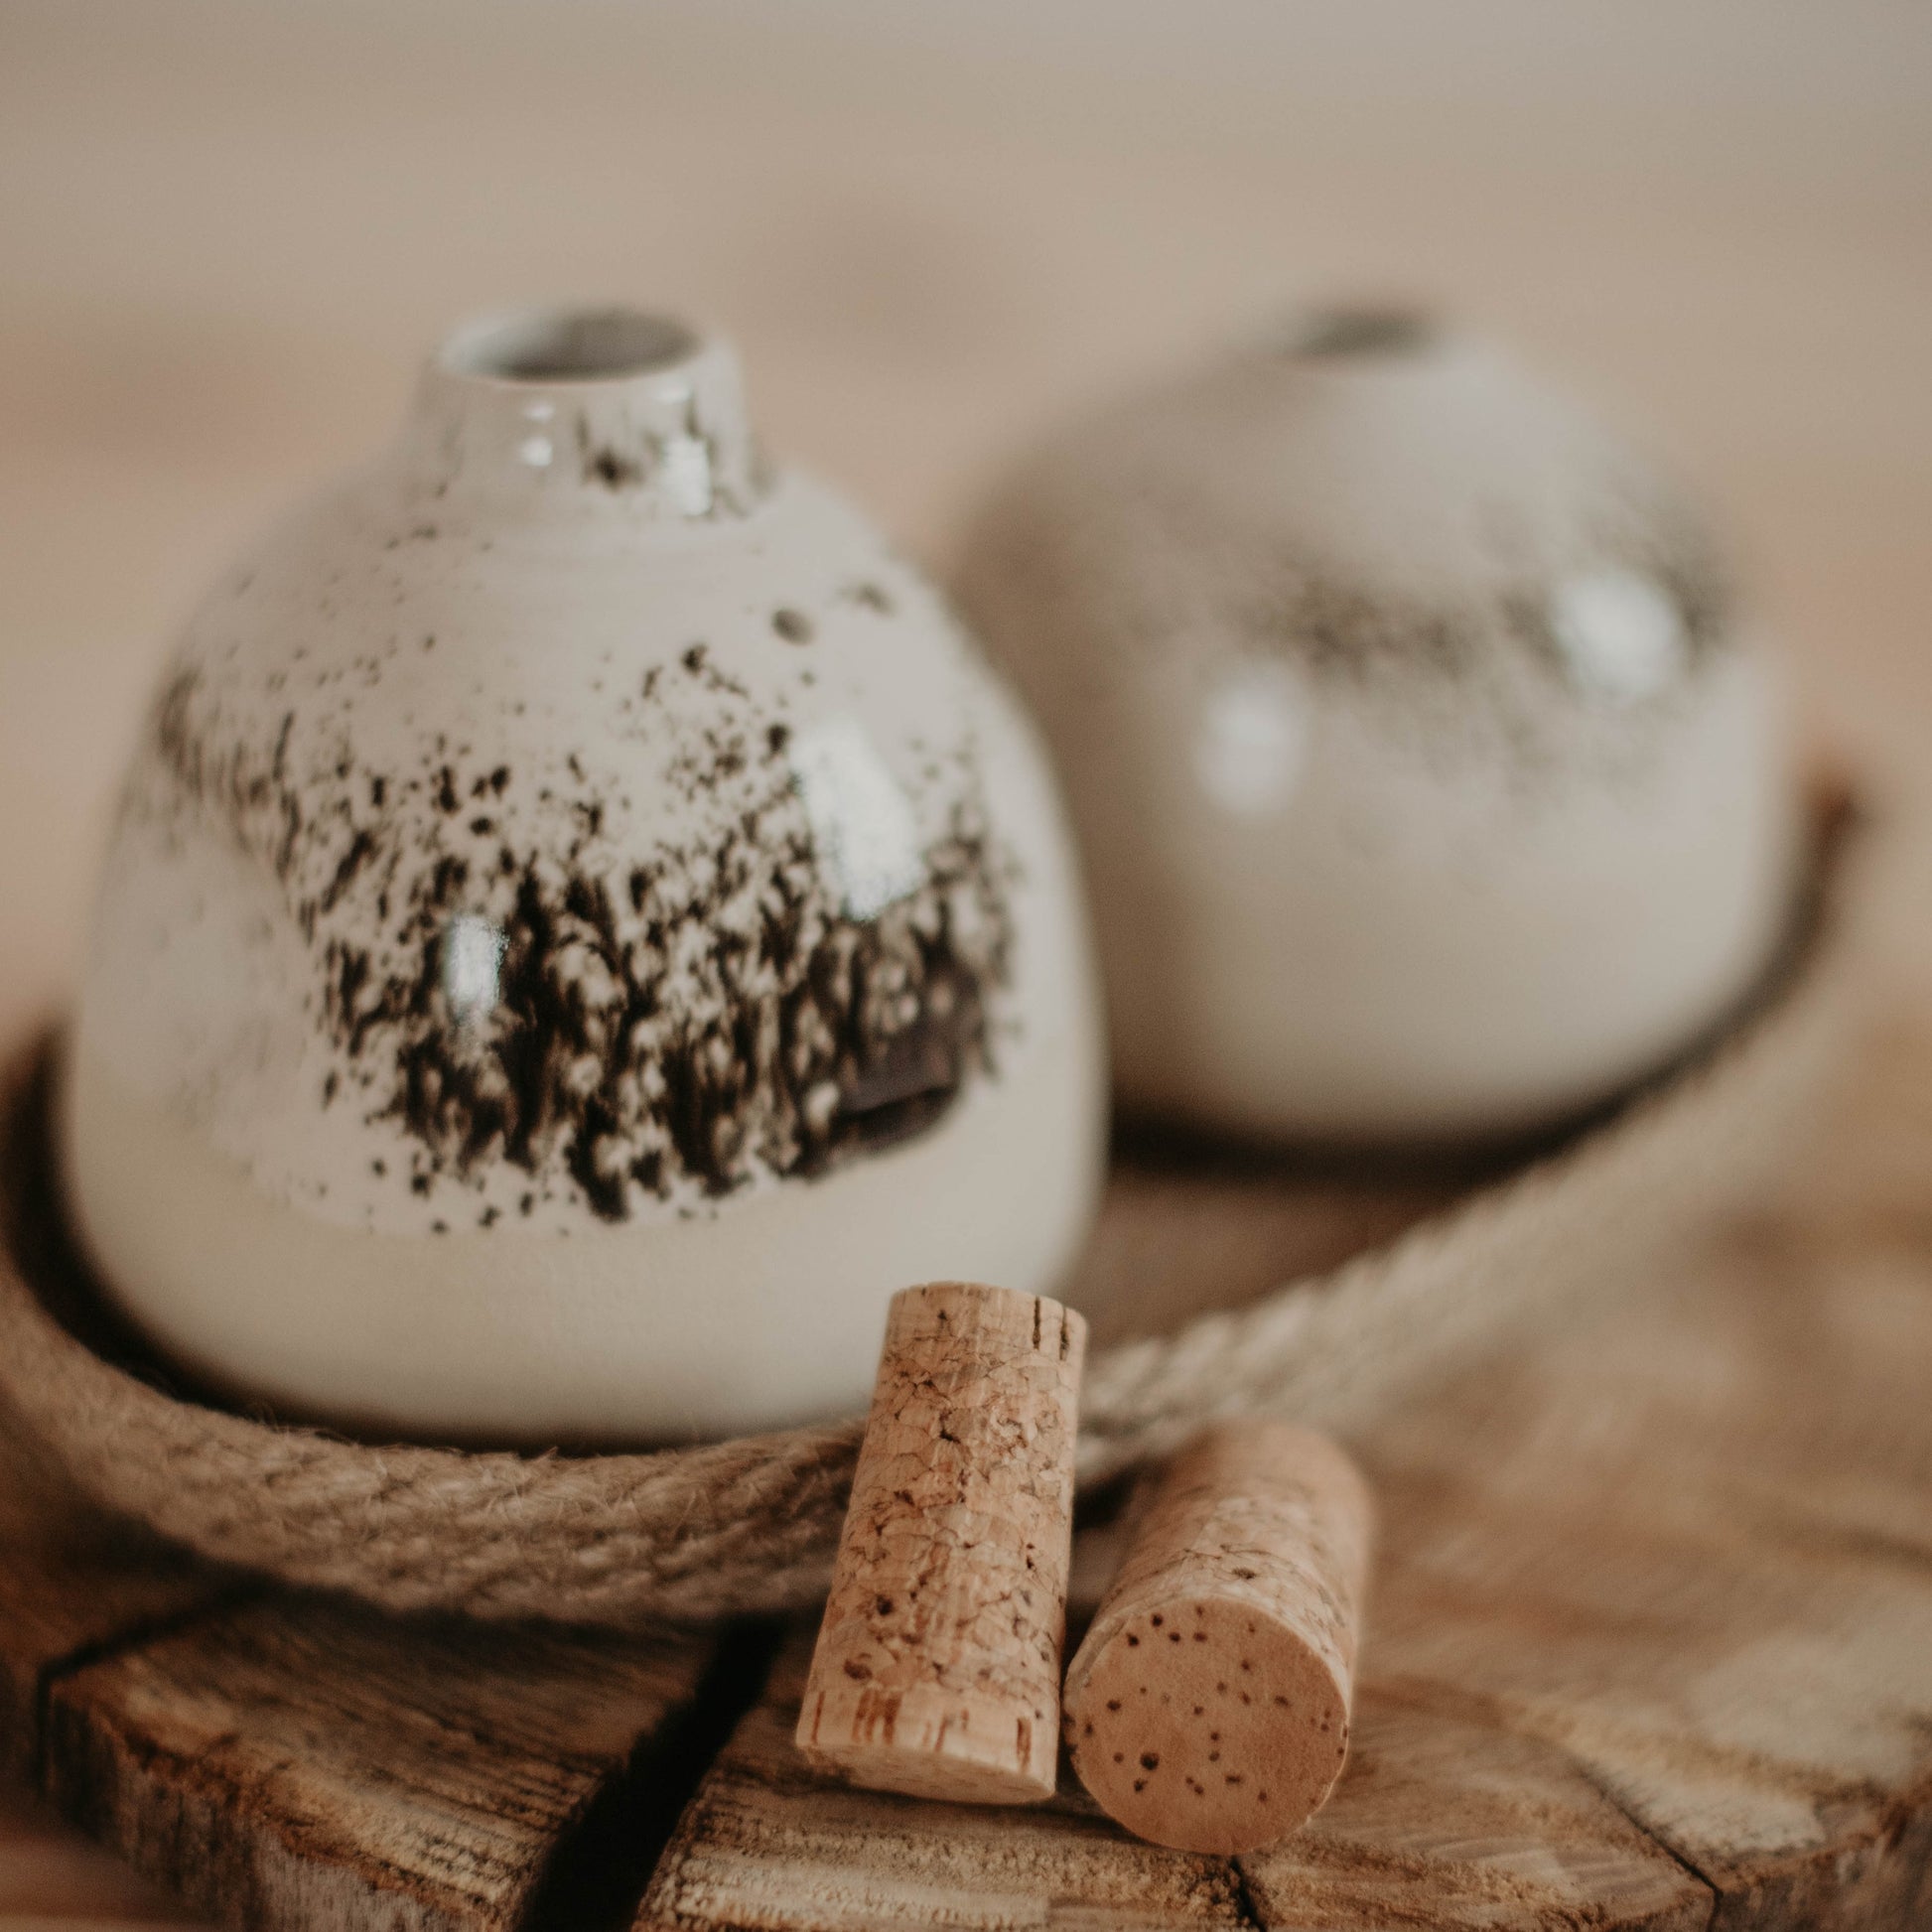 Dazzling handcrafted ceramic salt and pepper shakers, delicately painted with a speckled glaze, accompanied by an elegant jute basket.